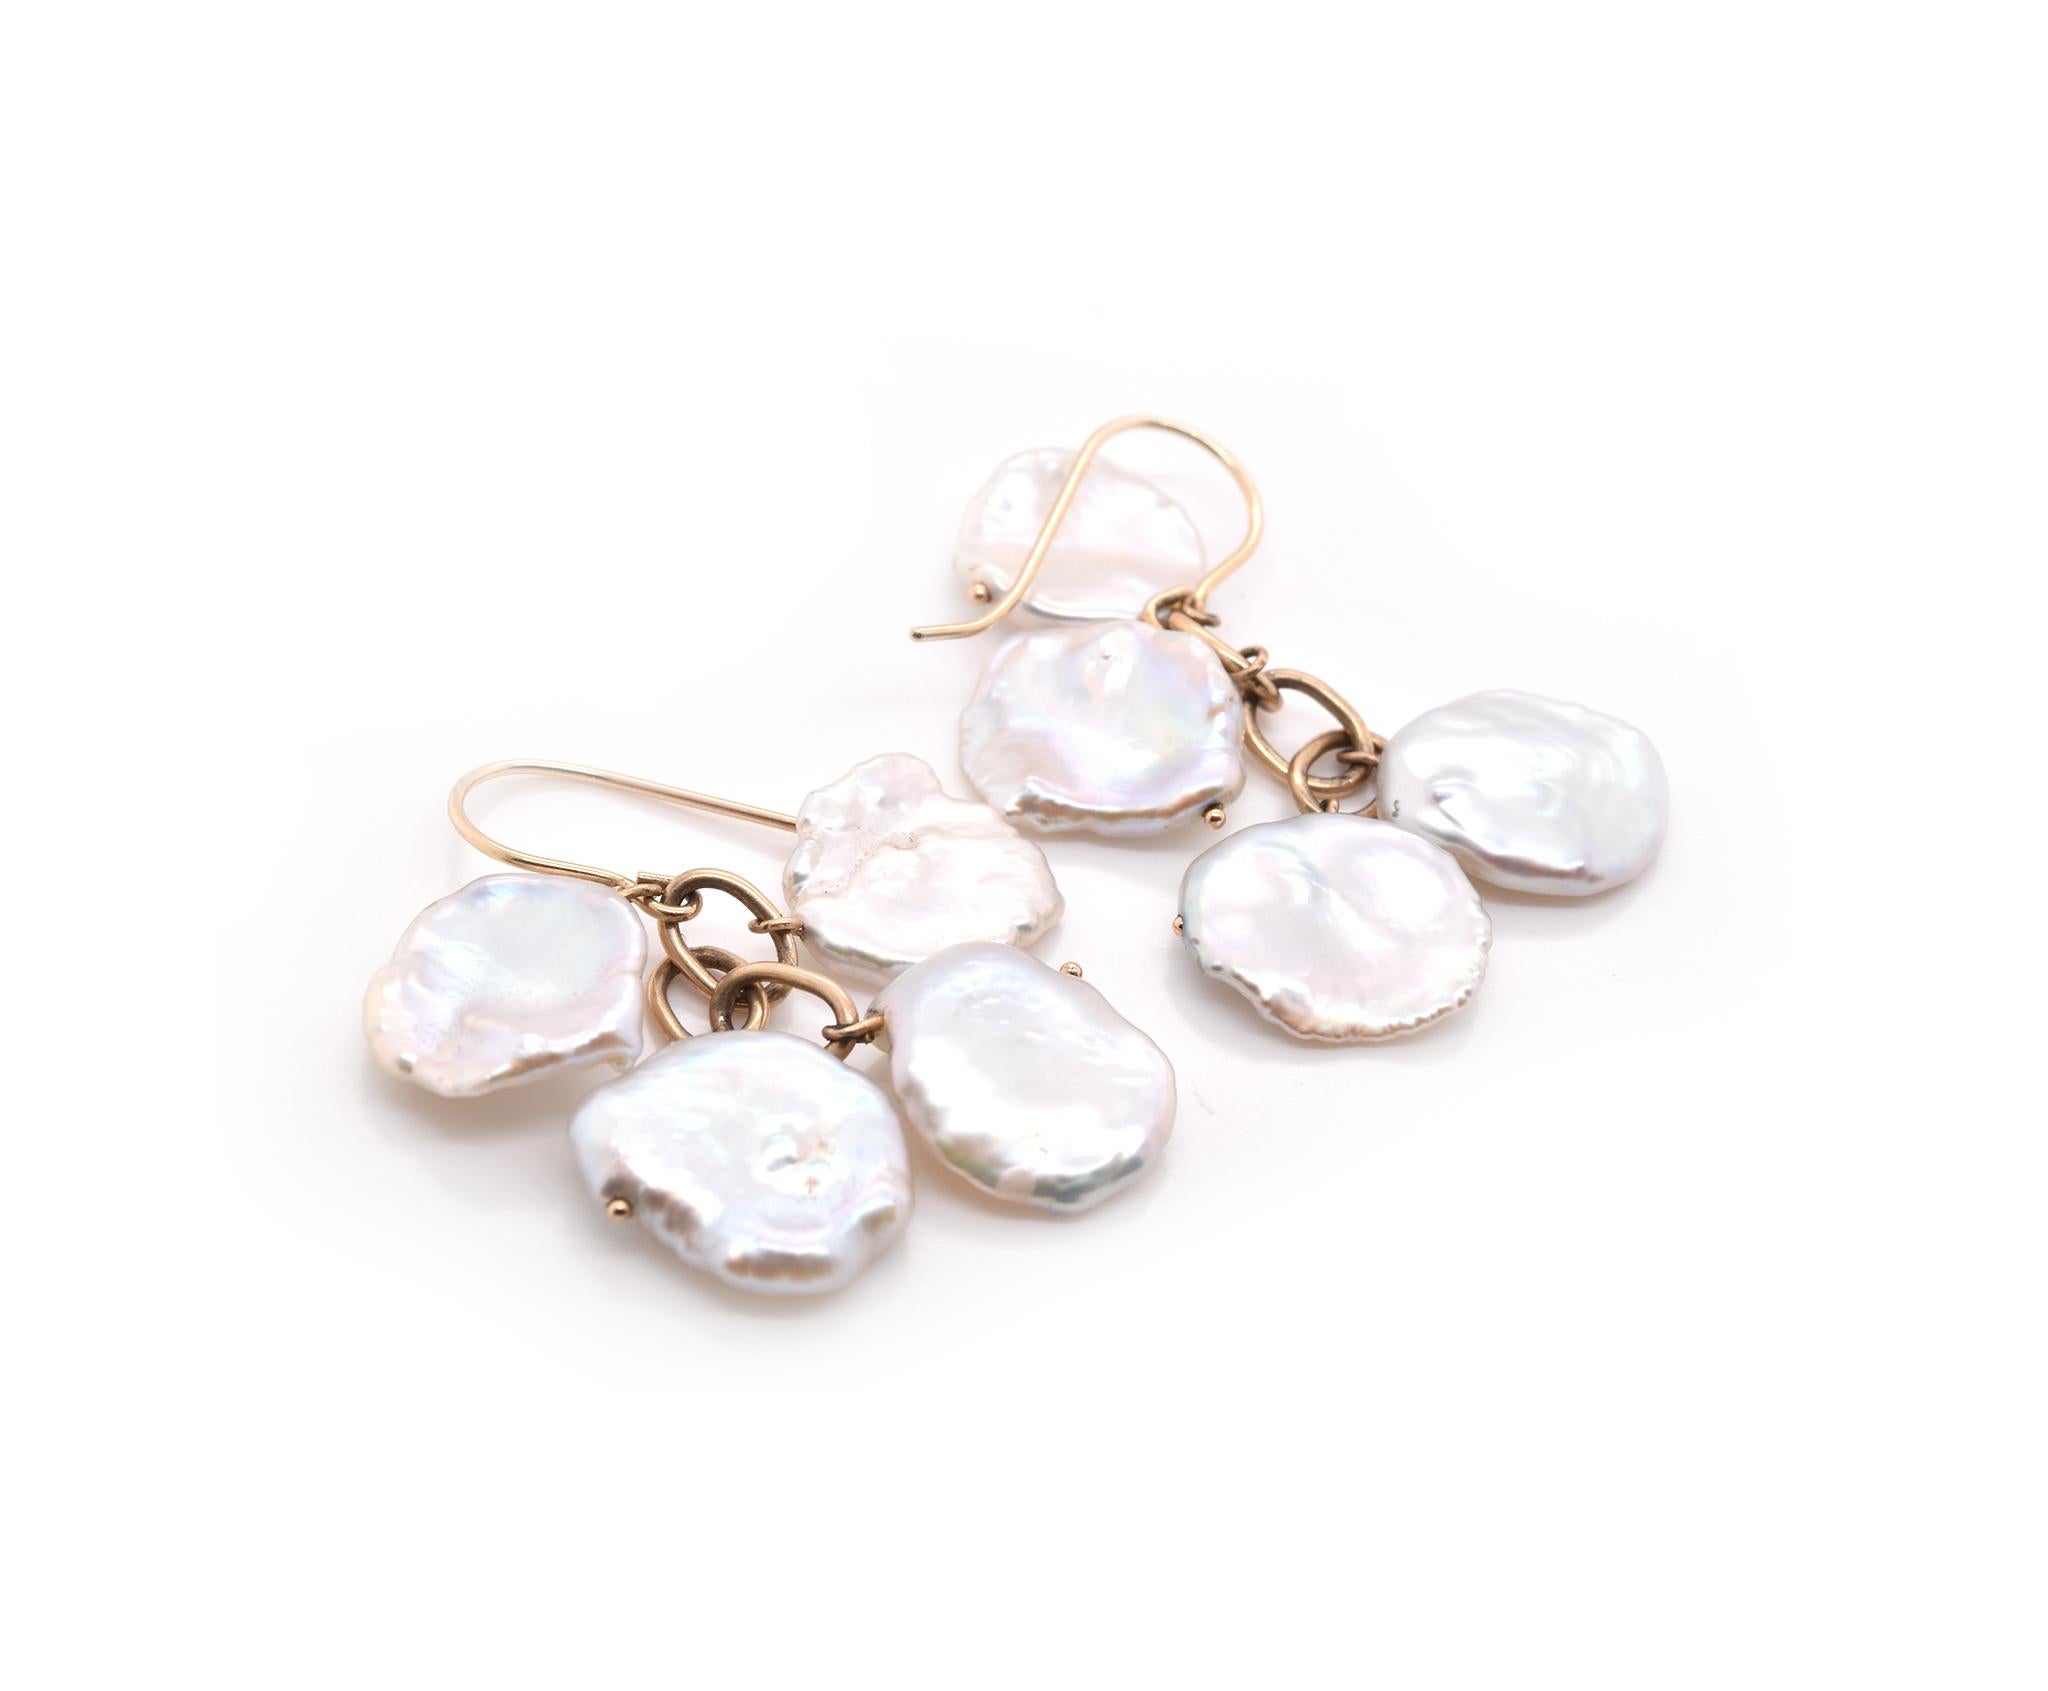 Designer: Keshi
Material: 14k yellow gold and pearl nuggets
Dimensions: the earrings measure 41.20mm in length
Weight: 6.4 grams
